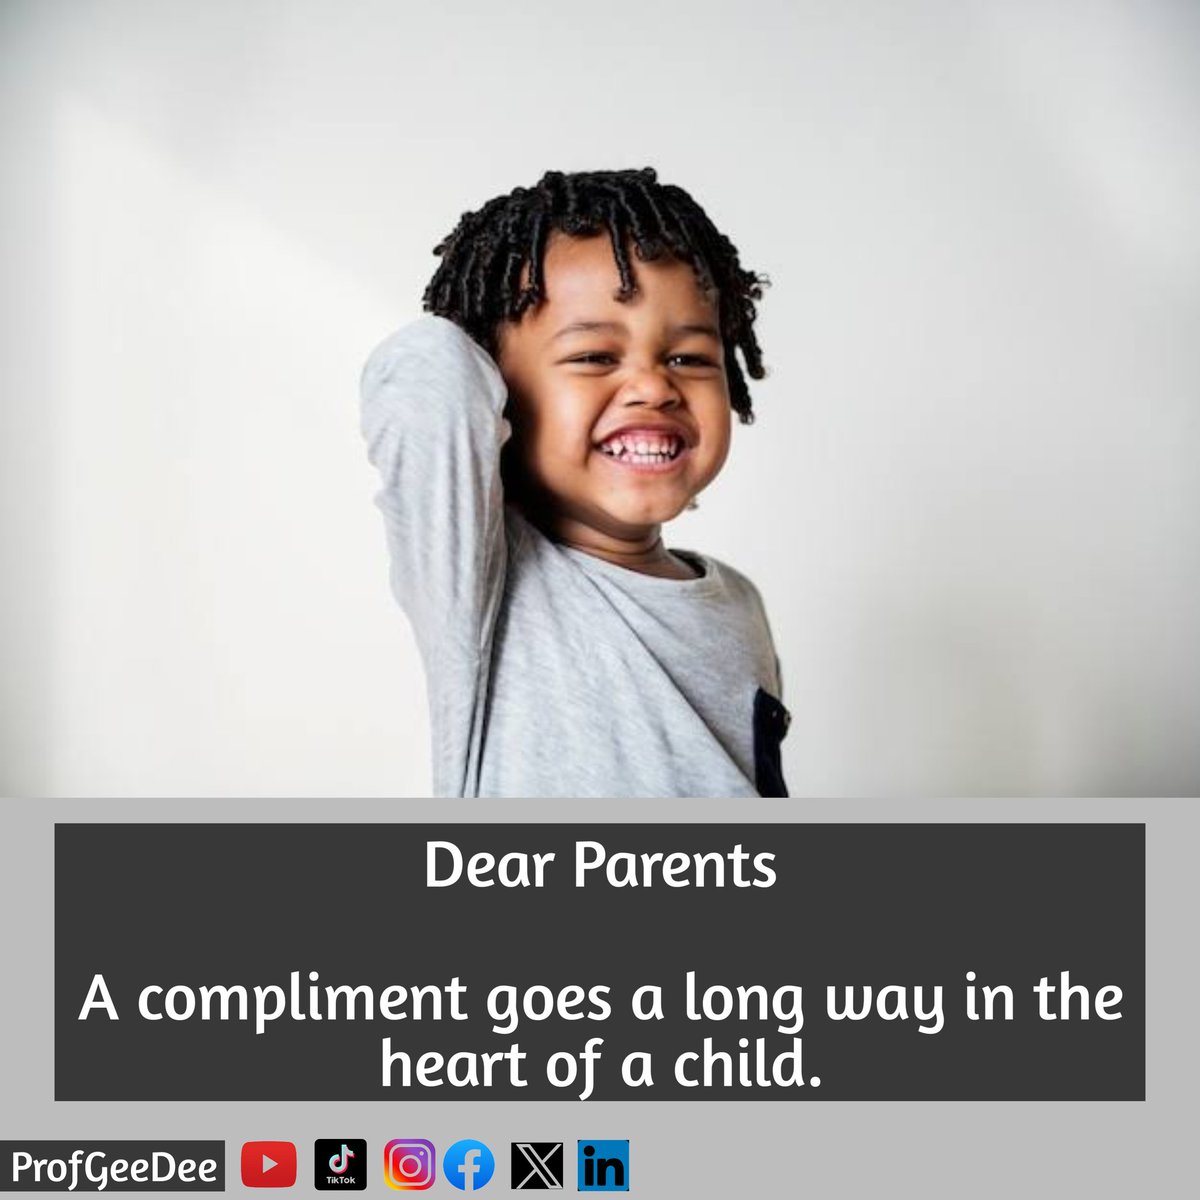 Do you know that with just a few words of compliment, you can brighten up the face of your child and build his/her confidence?

#earlyyears
#earlylearning
#earlychildhooddevelopment
#dearparentseries
#profgeedee